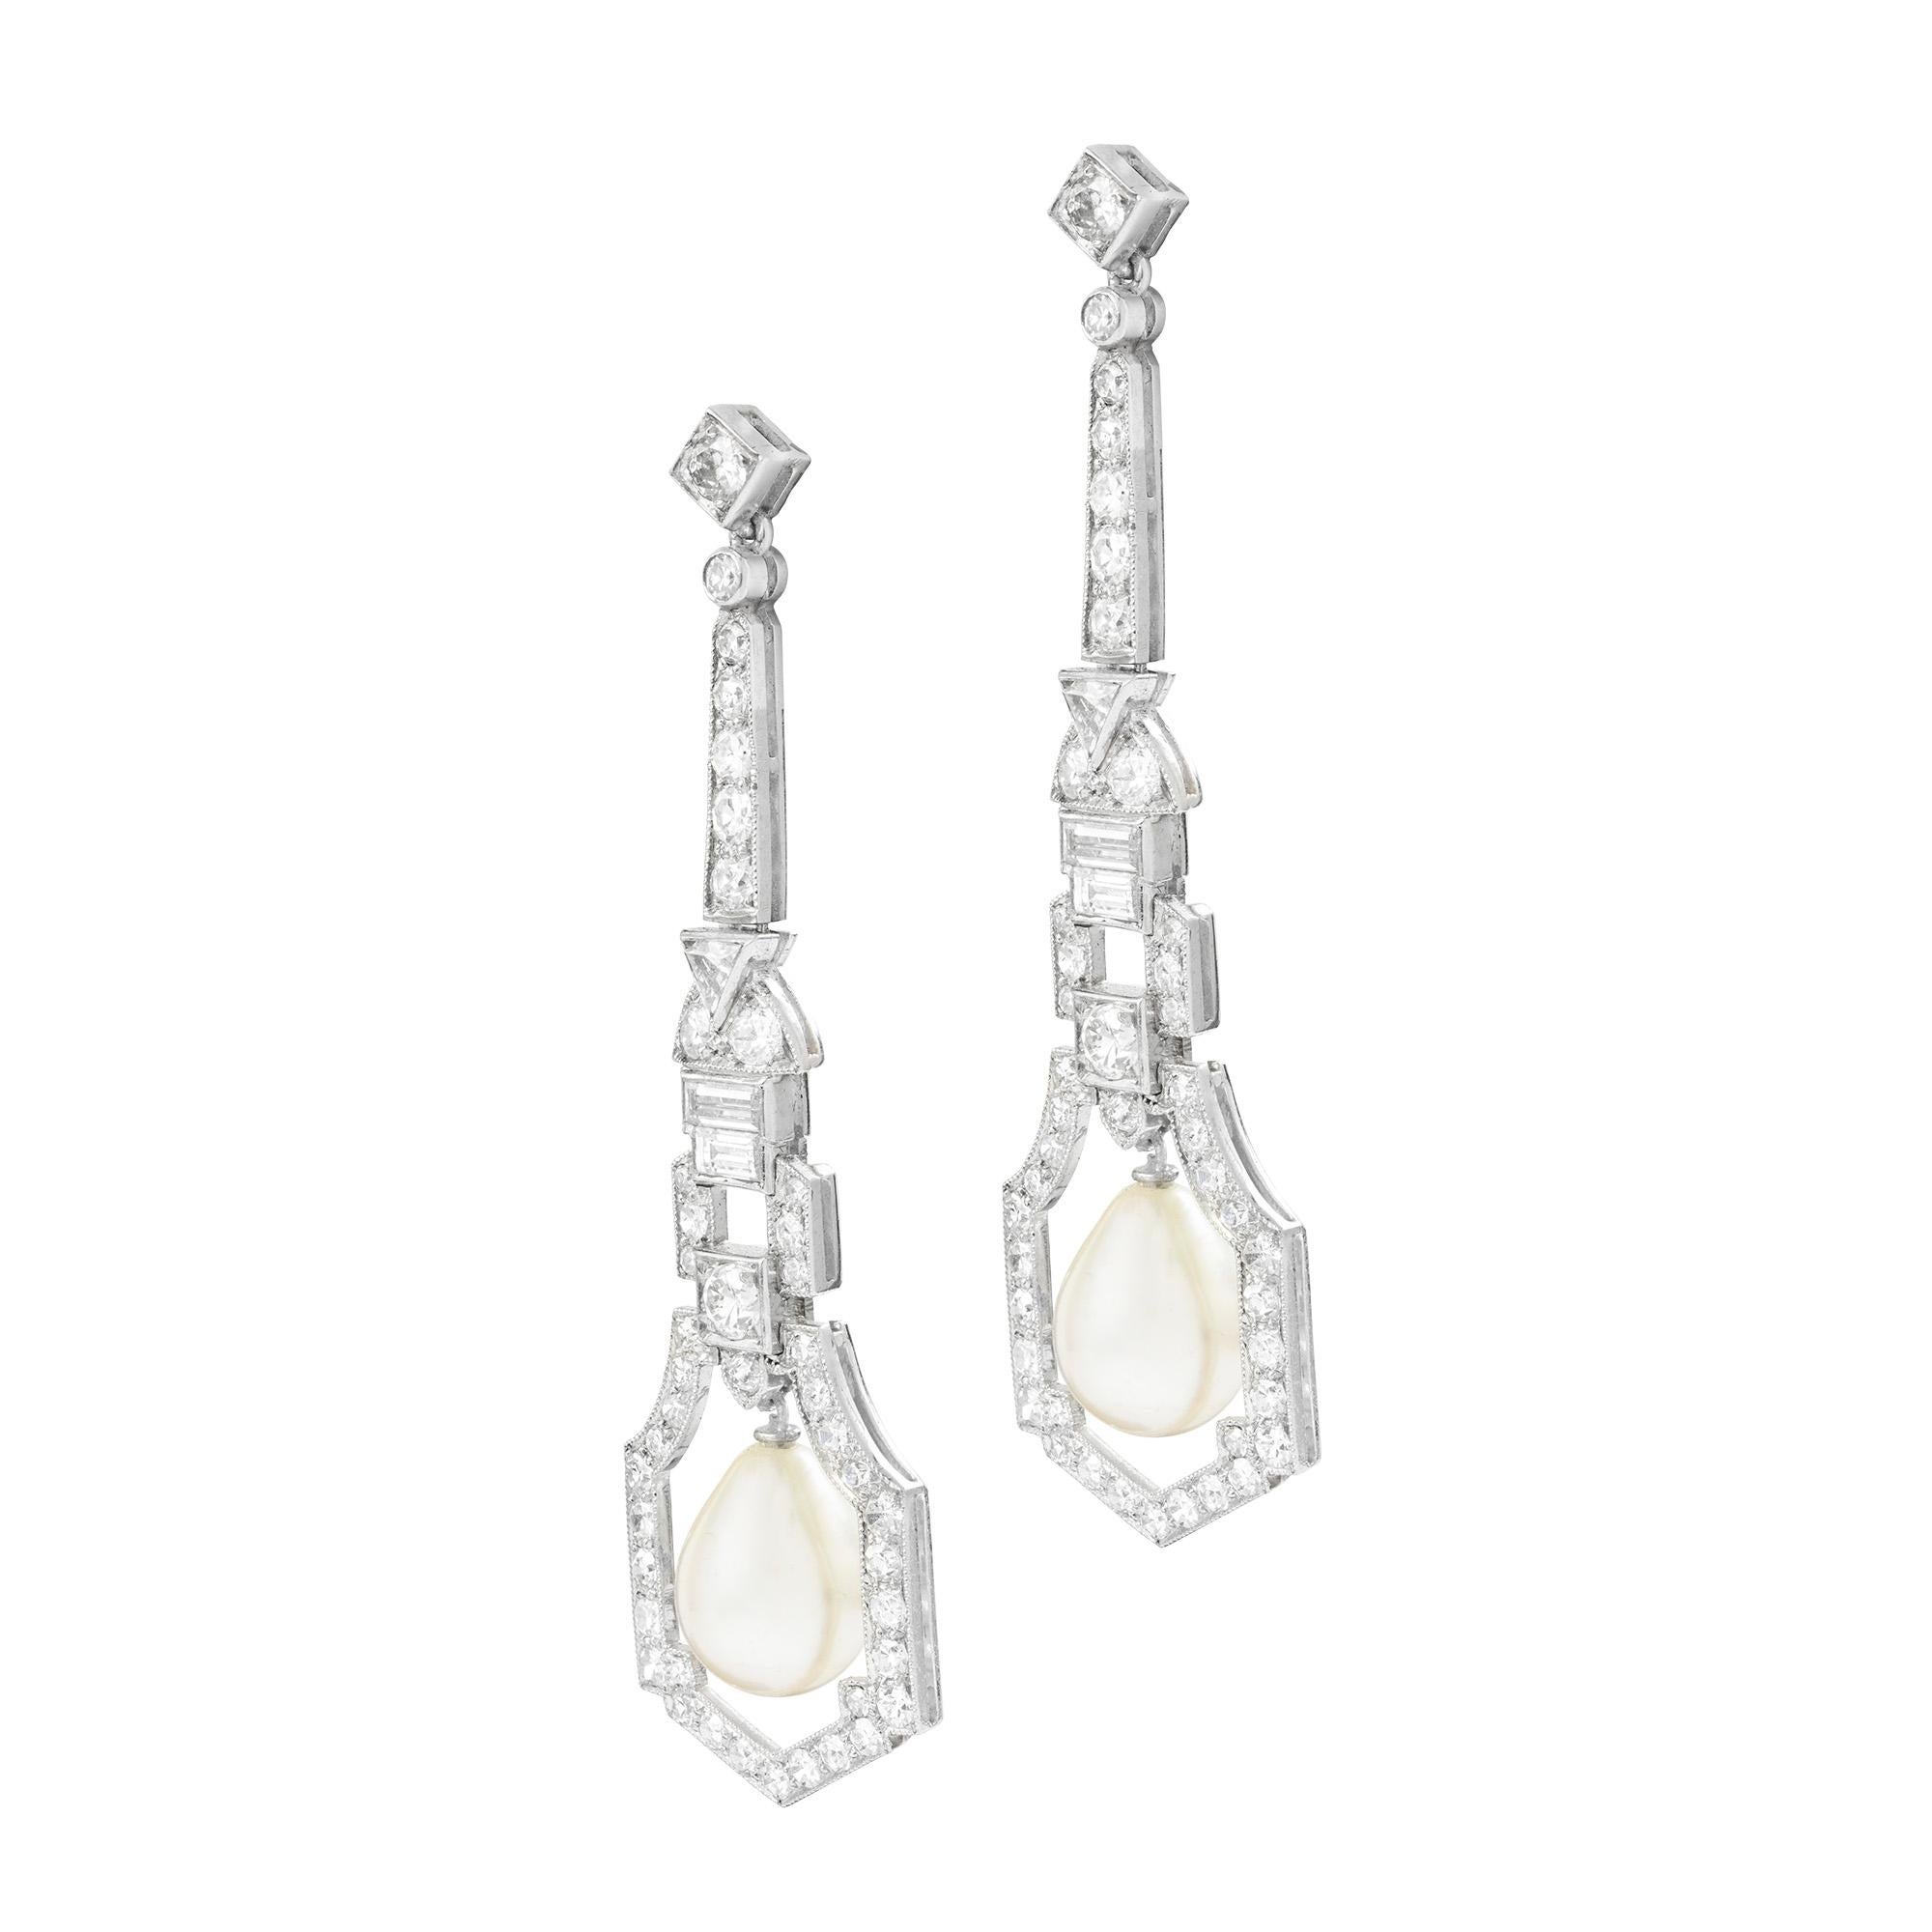 Brilliant Cut A Pair Of Art Deco Natural Pearl And Diamond Drop Earrings For Sale